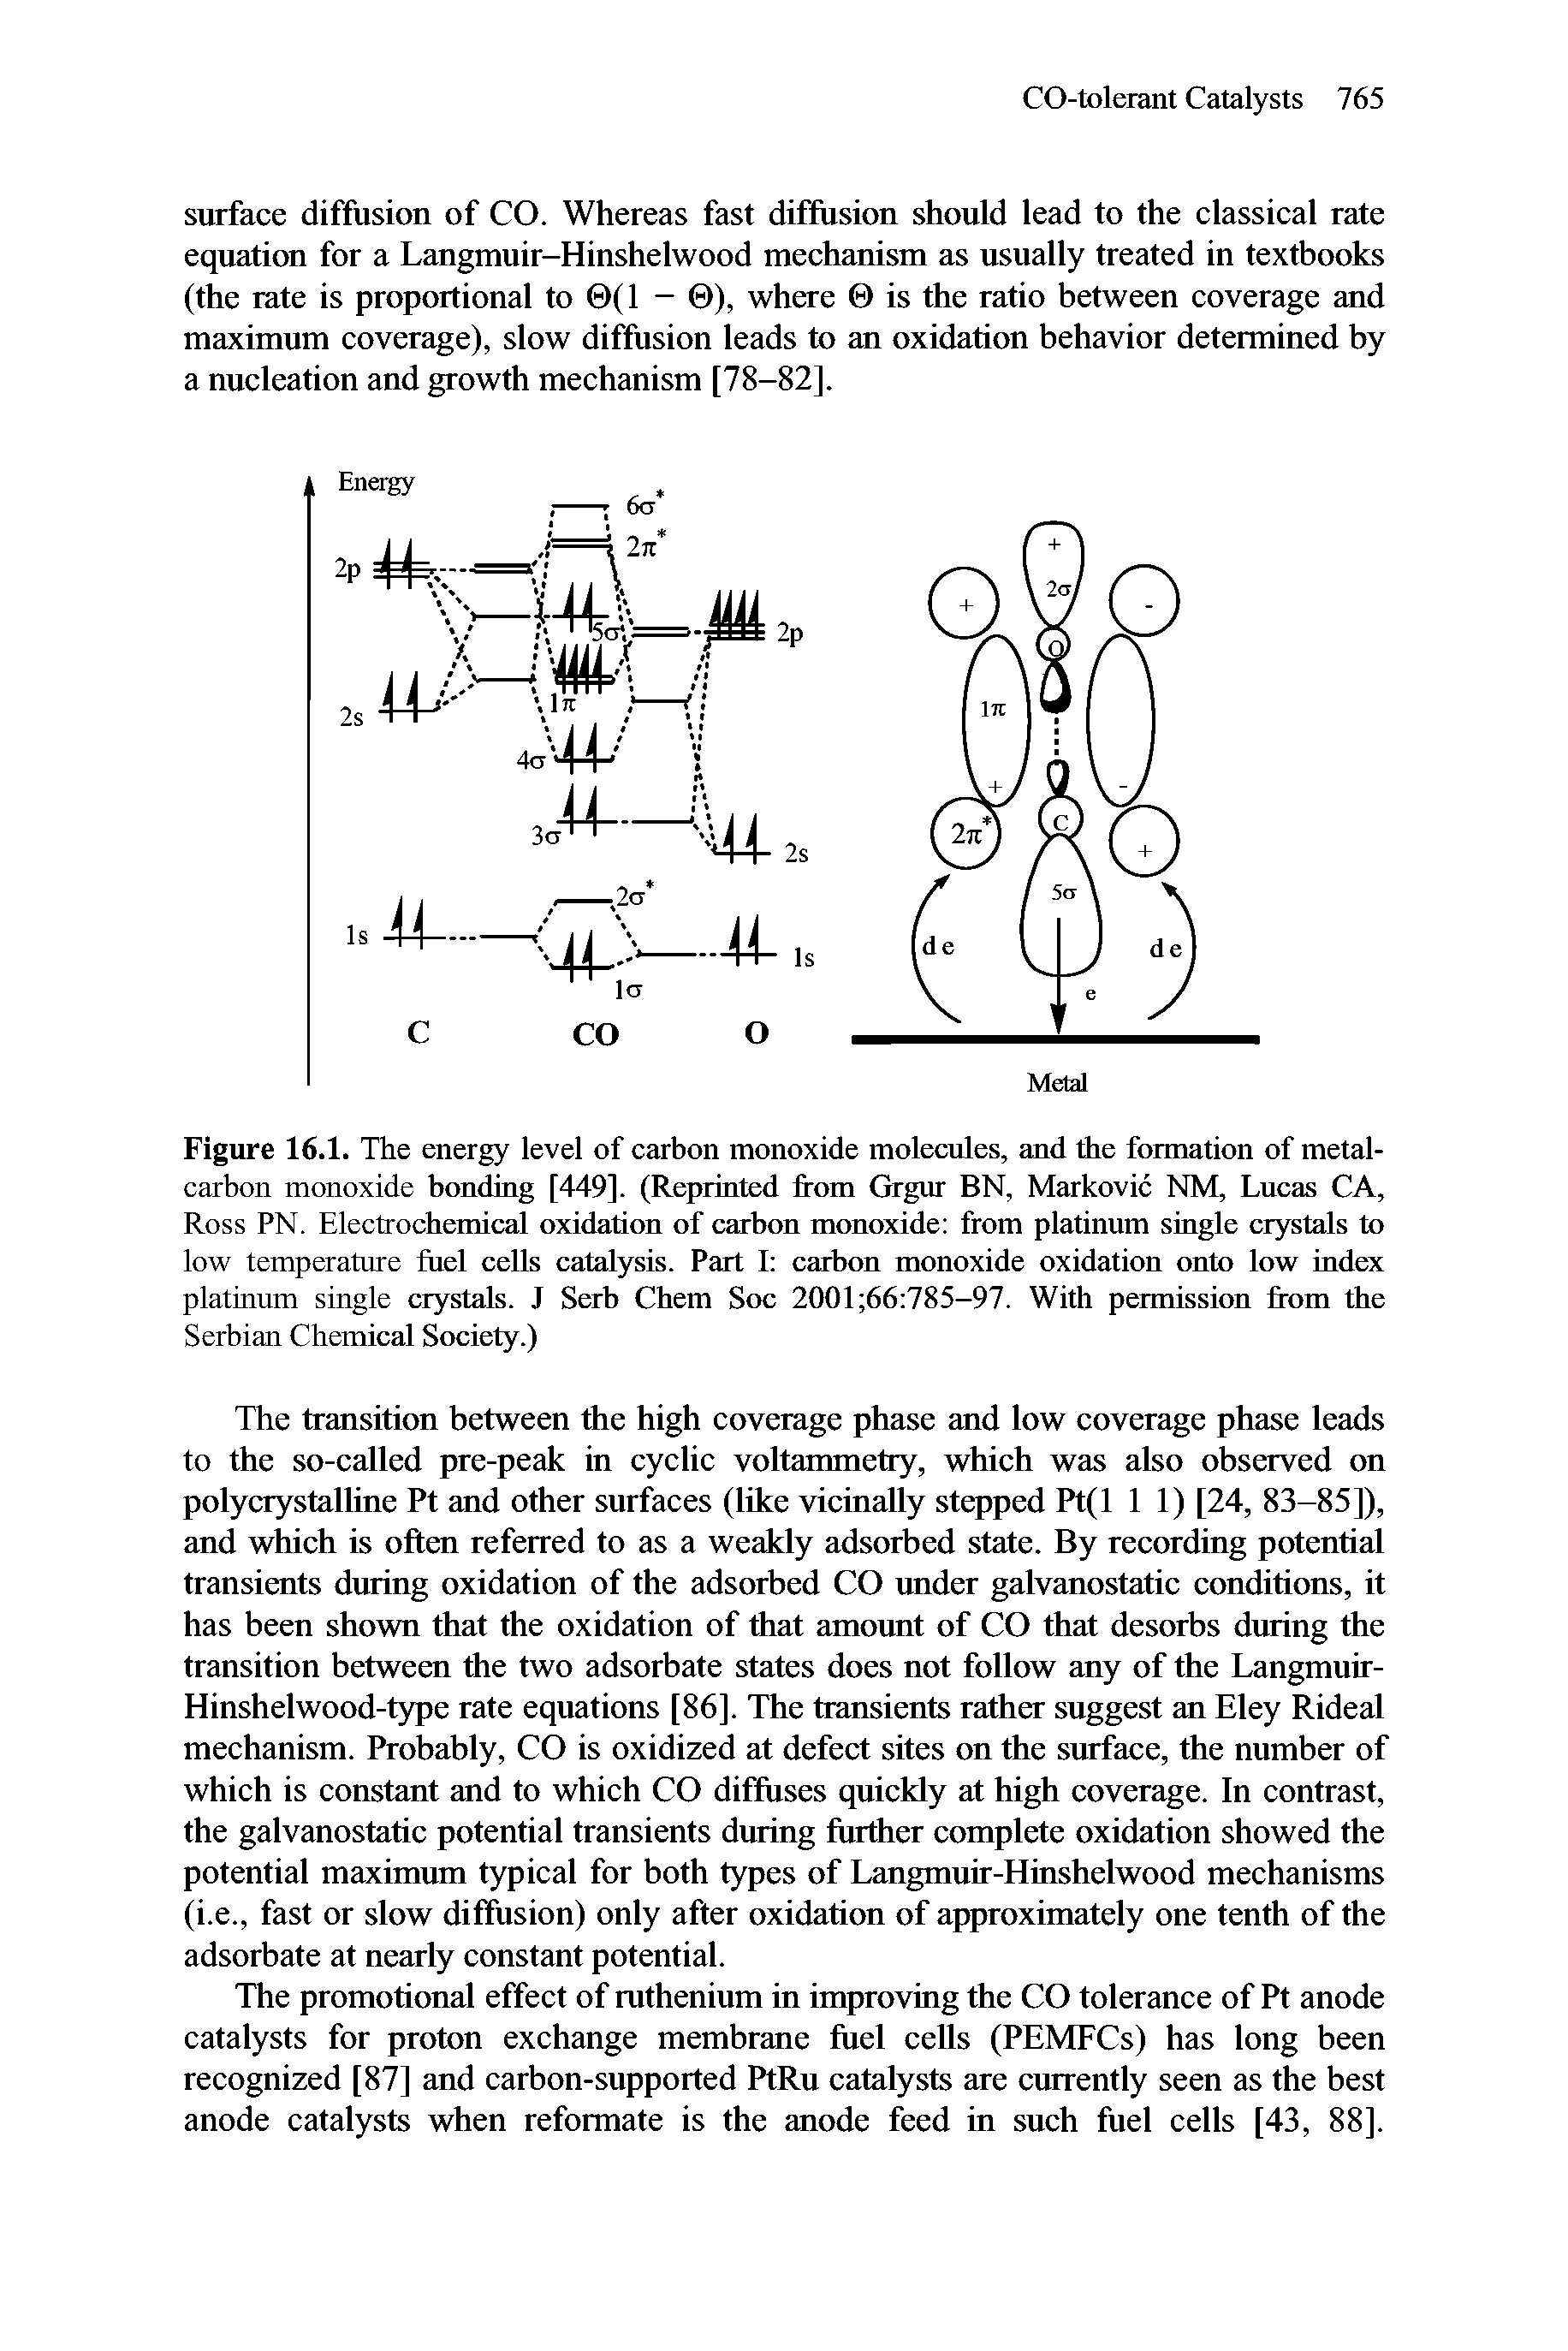 Figure 16.1. The energy level of carbon monoxide molecules, and the formation of metal-carbon monoxide bonding [449]. (Reprinted from Grgur BN, Markovic NM, Lucas CA, Ross PN. Electrochemical oxidation of carbon monoxide from platinum single crystals to low temperature fuel cells catalysis. Part 1 carbon monoxide oxidation onto low index platinum single crystals. J Serb Chem Soc 2001 66 785-97. With permission from the Serbian Chemical Society.)...